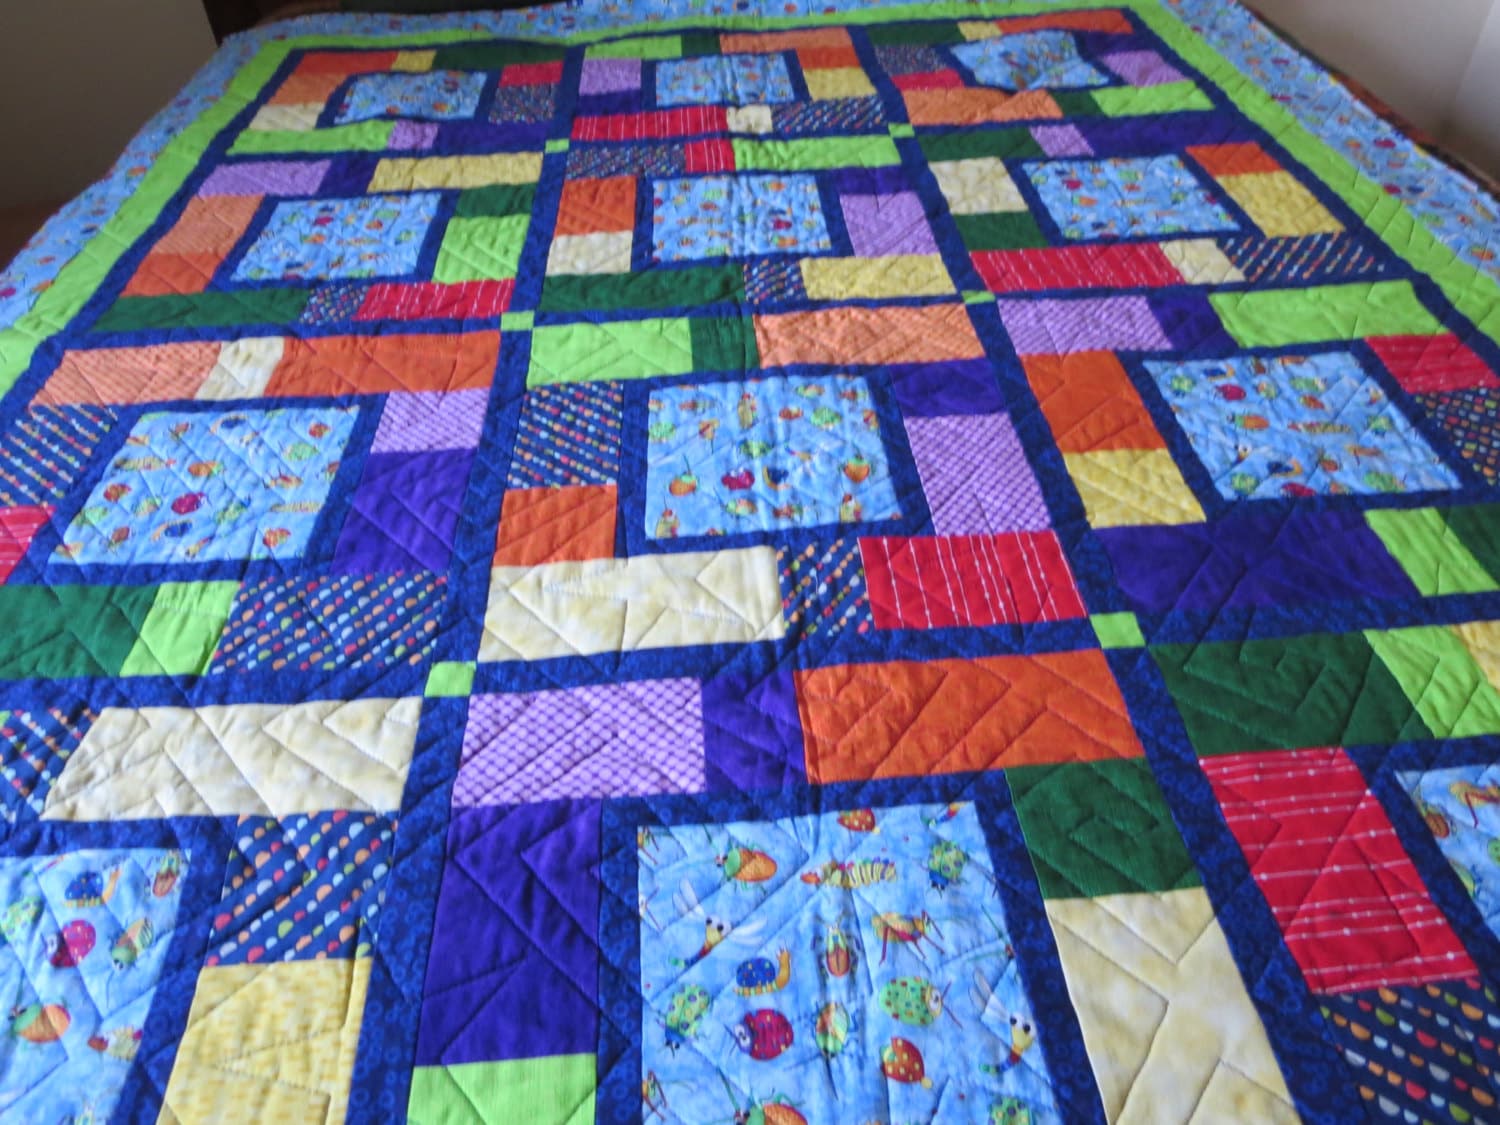 Bugs Laptop quilt with flannel back. Primary colors and a